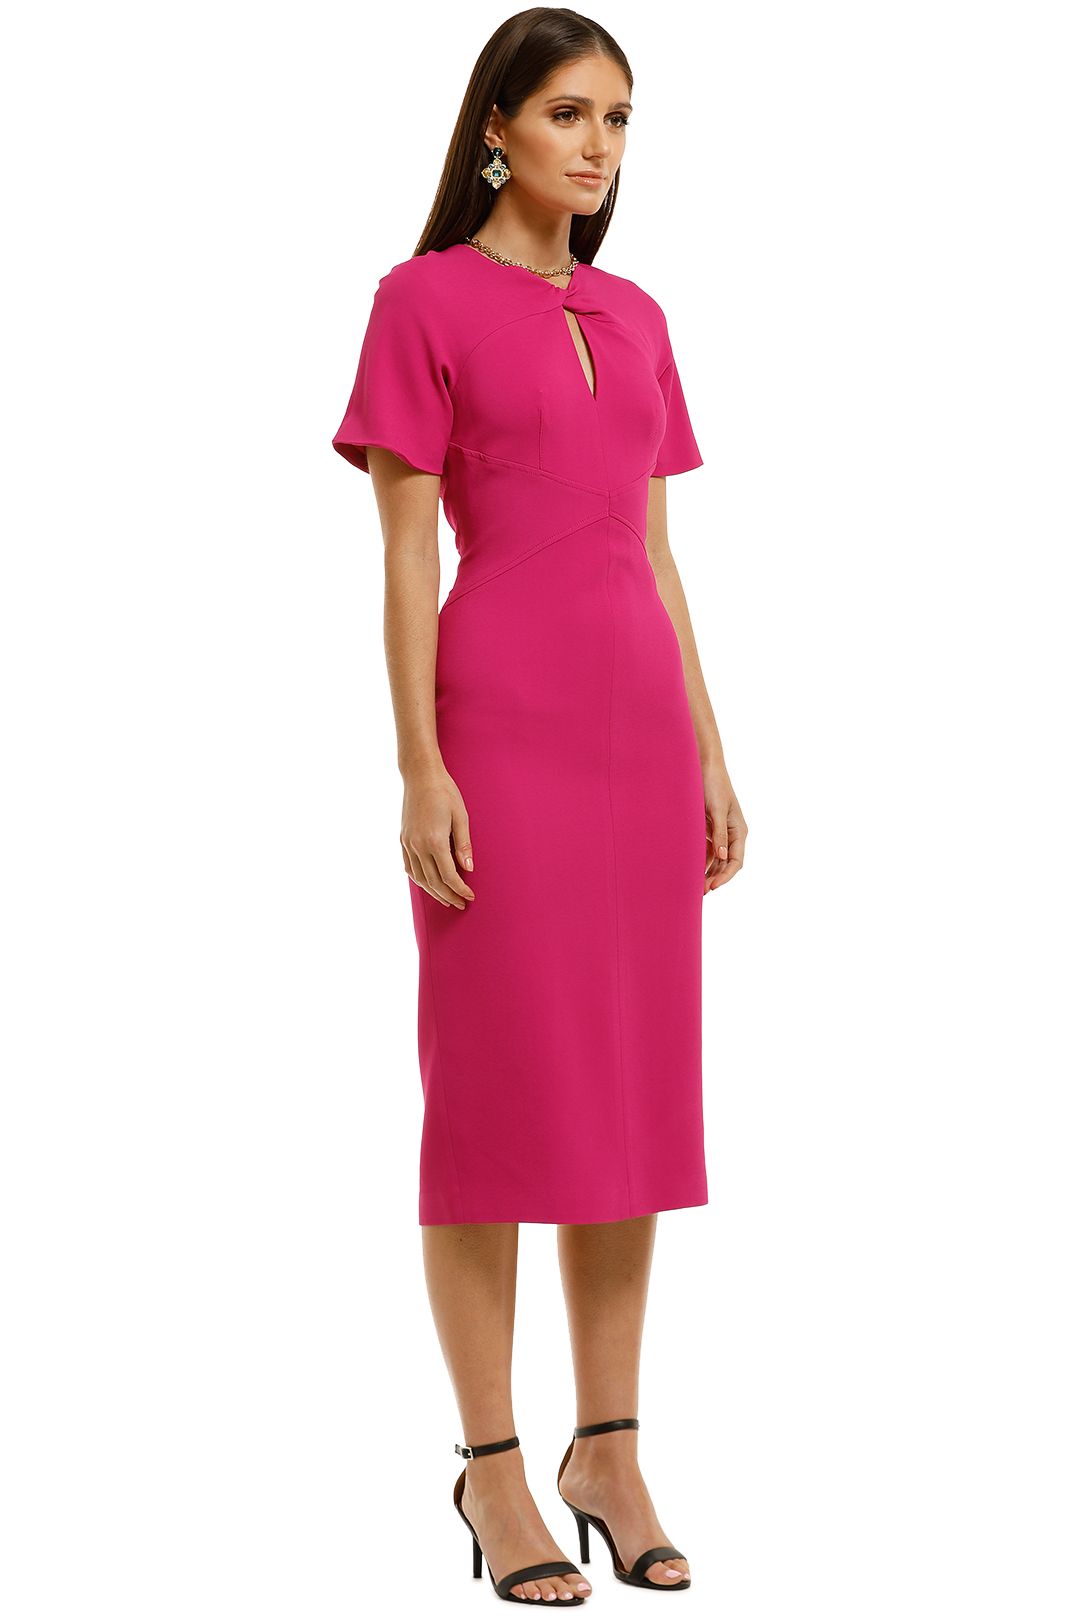 Ginger-and-Smart-Advocate-Fitted-Dress-Fuschia-Side